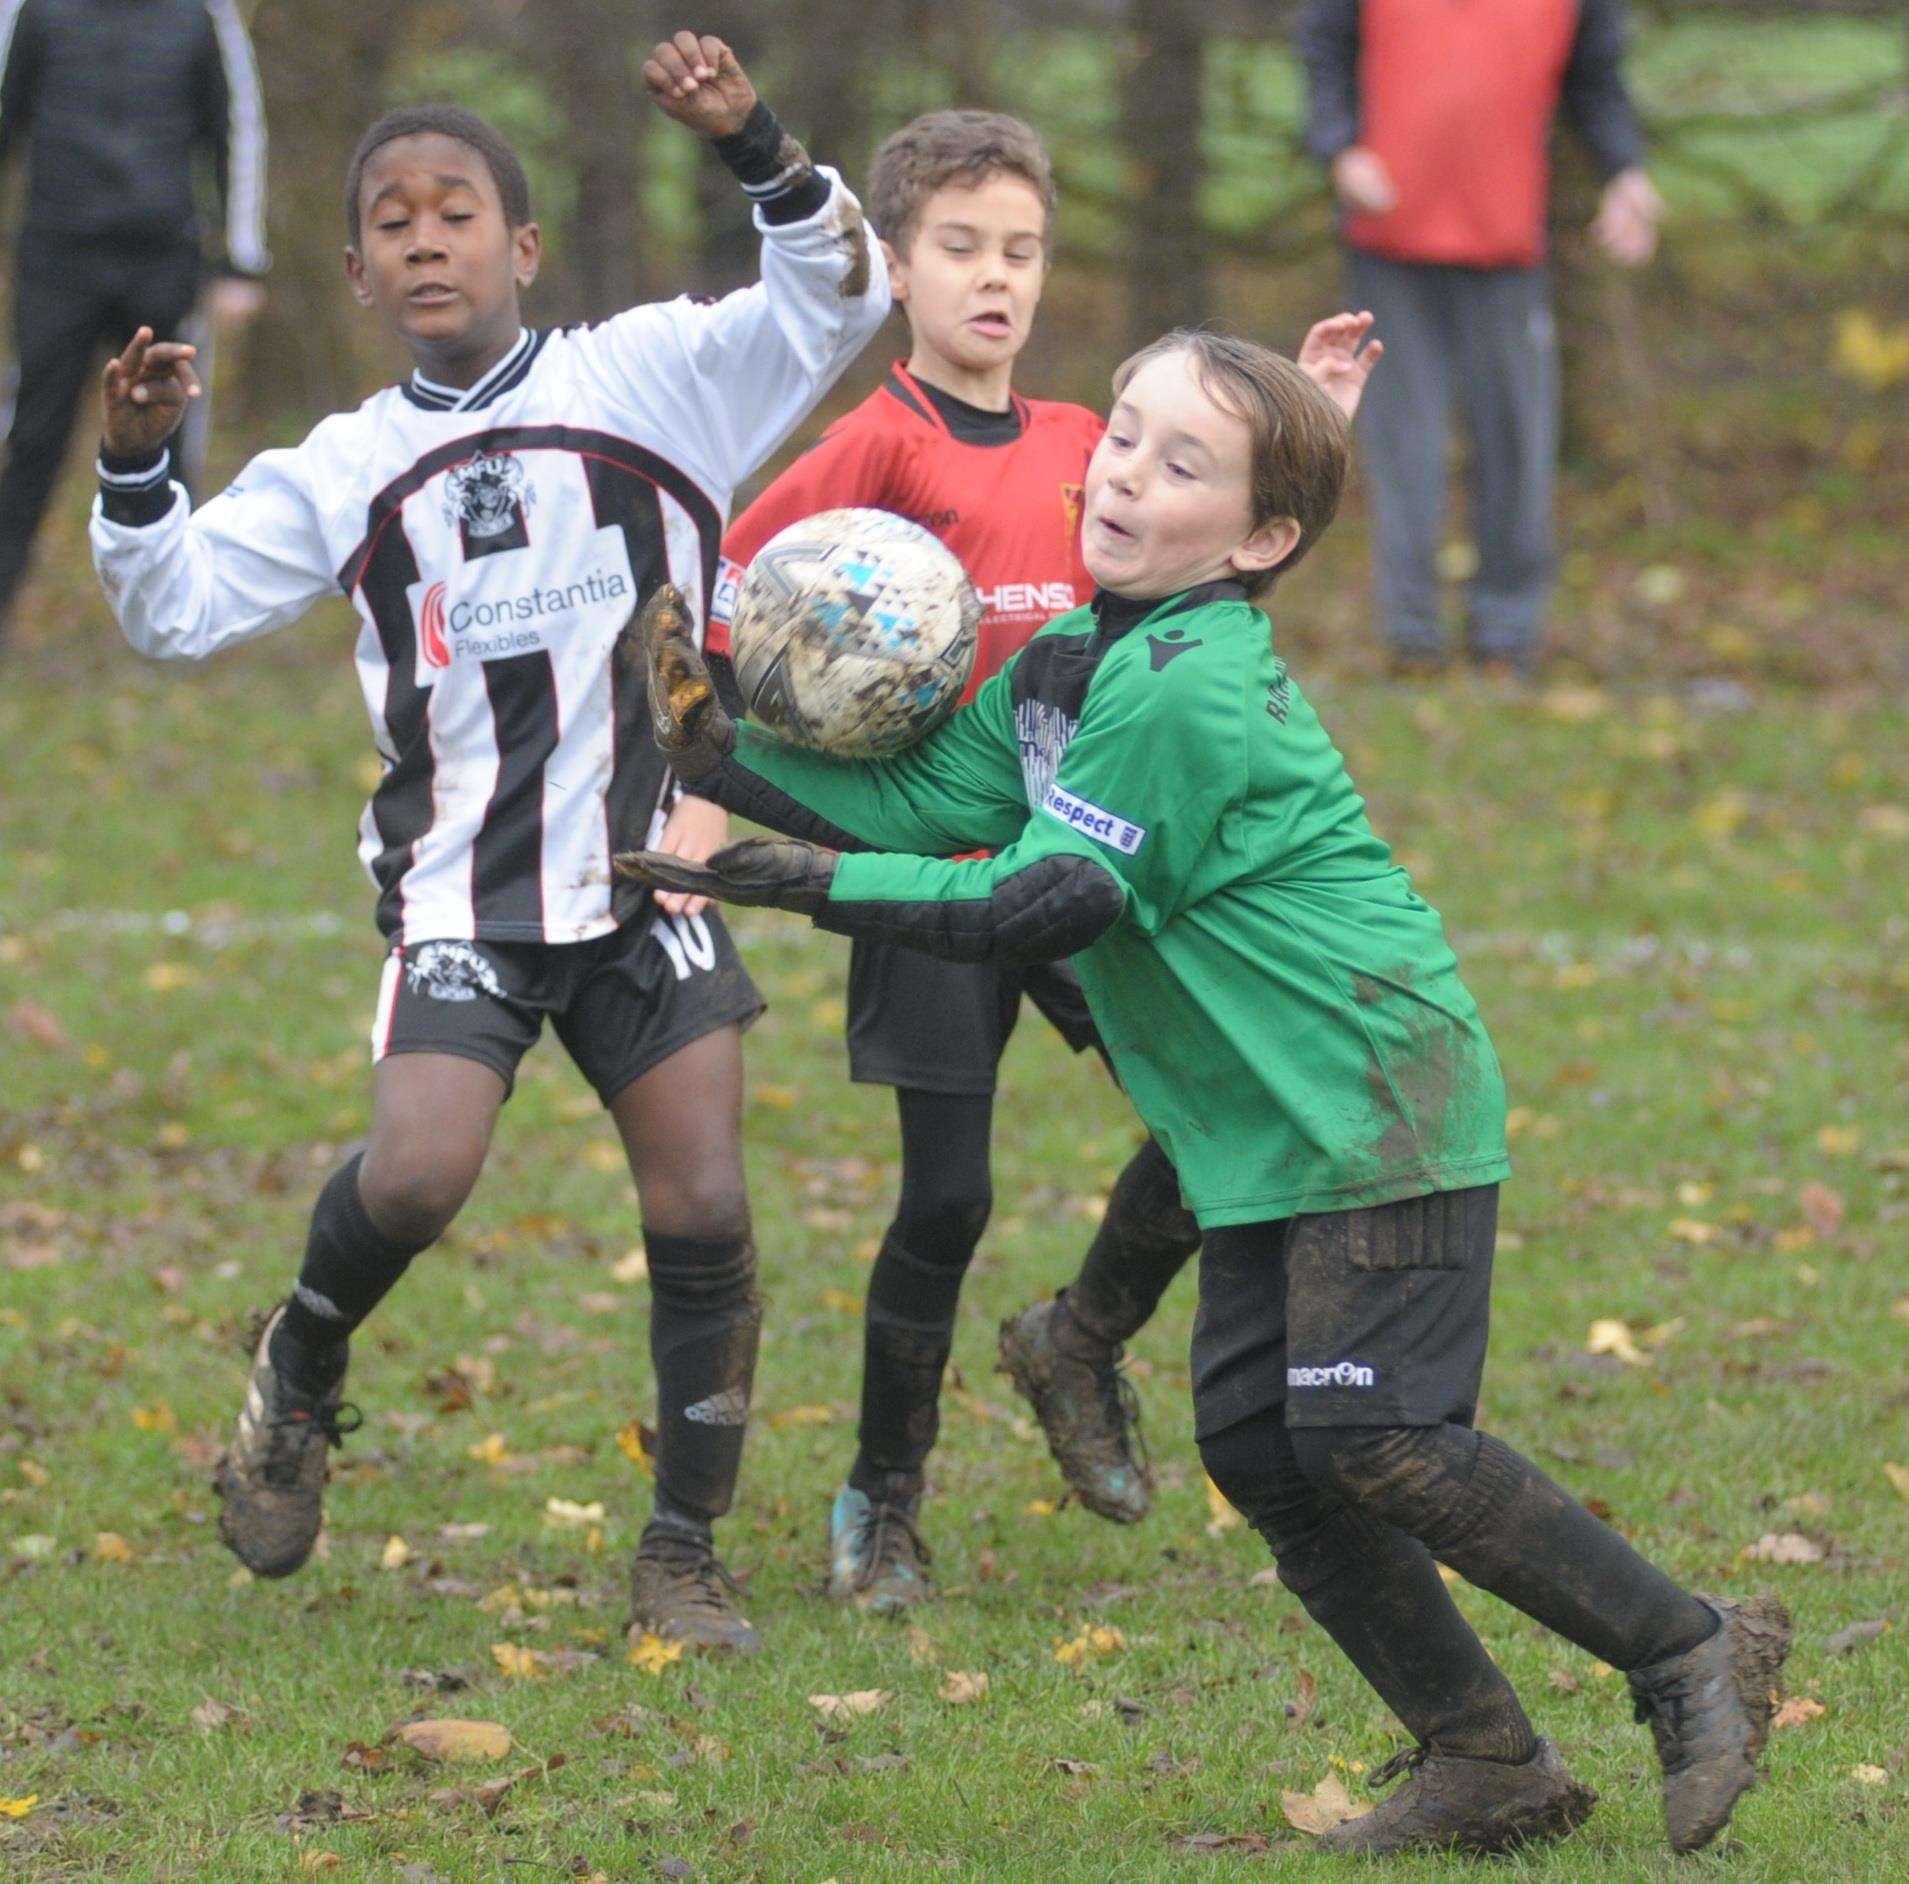 The Rainham 84 keeper is called into action against Milton & Fulston United under-8s Picture: Steve Crispe